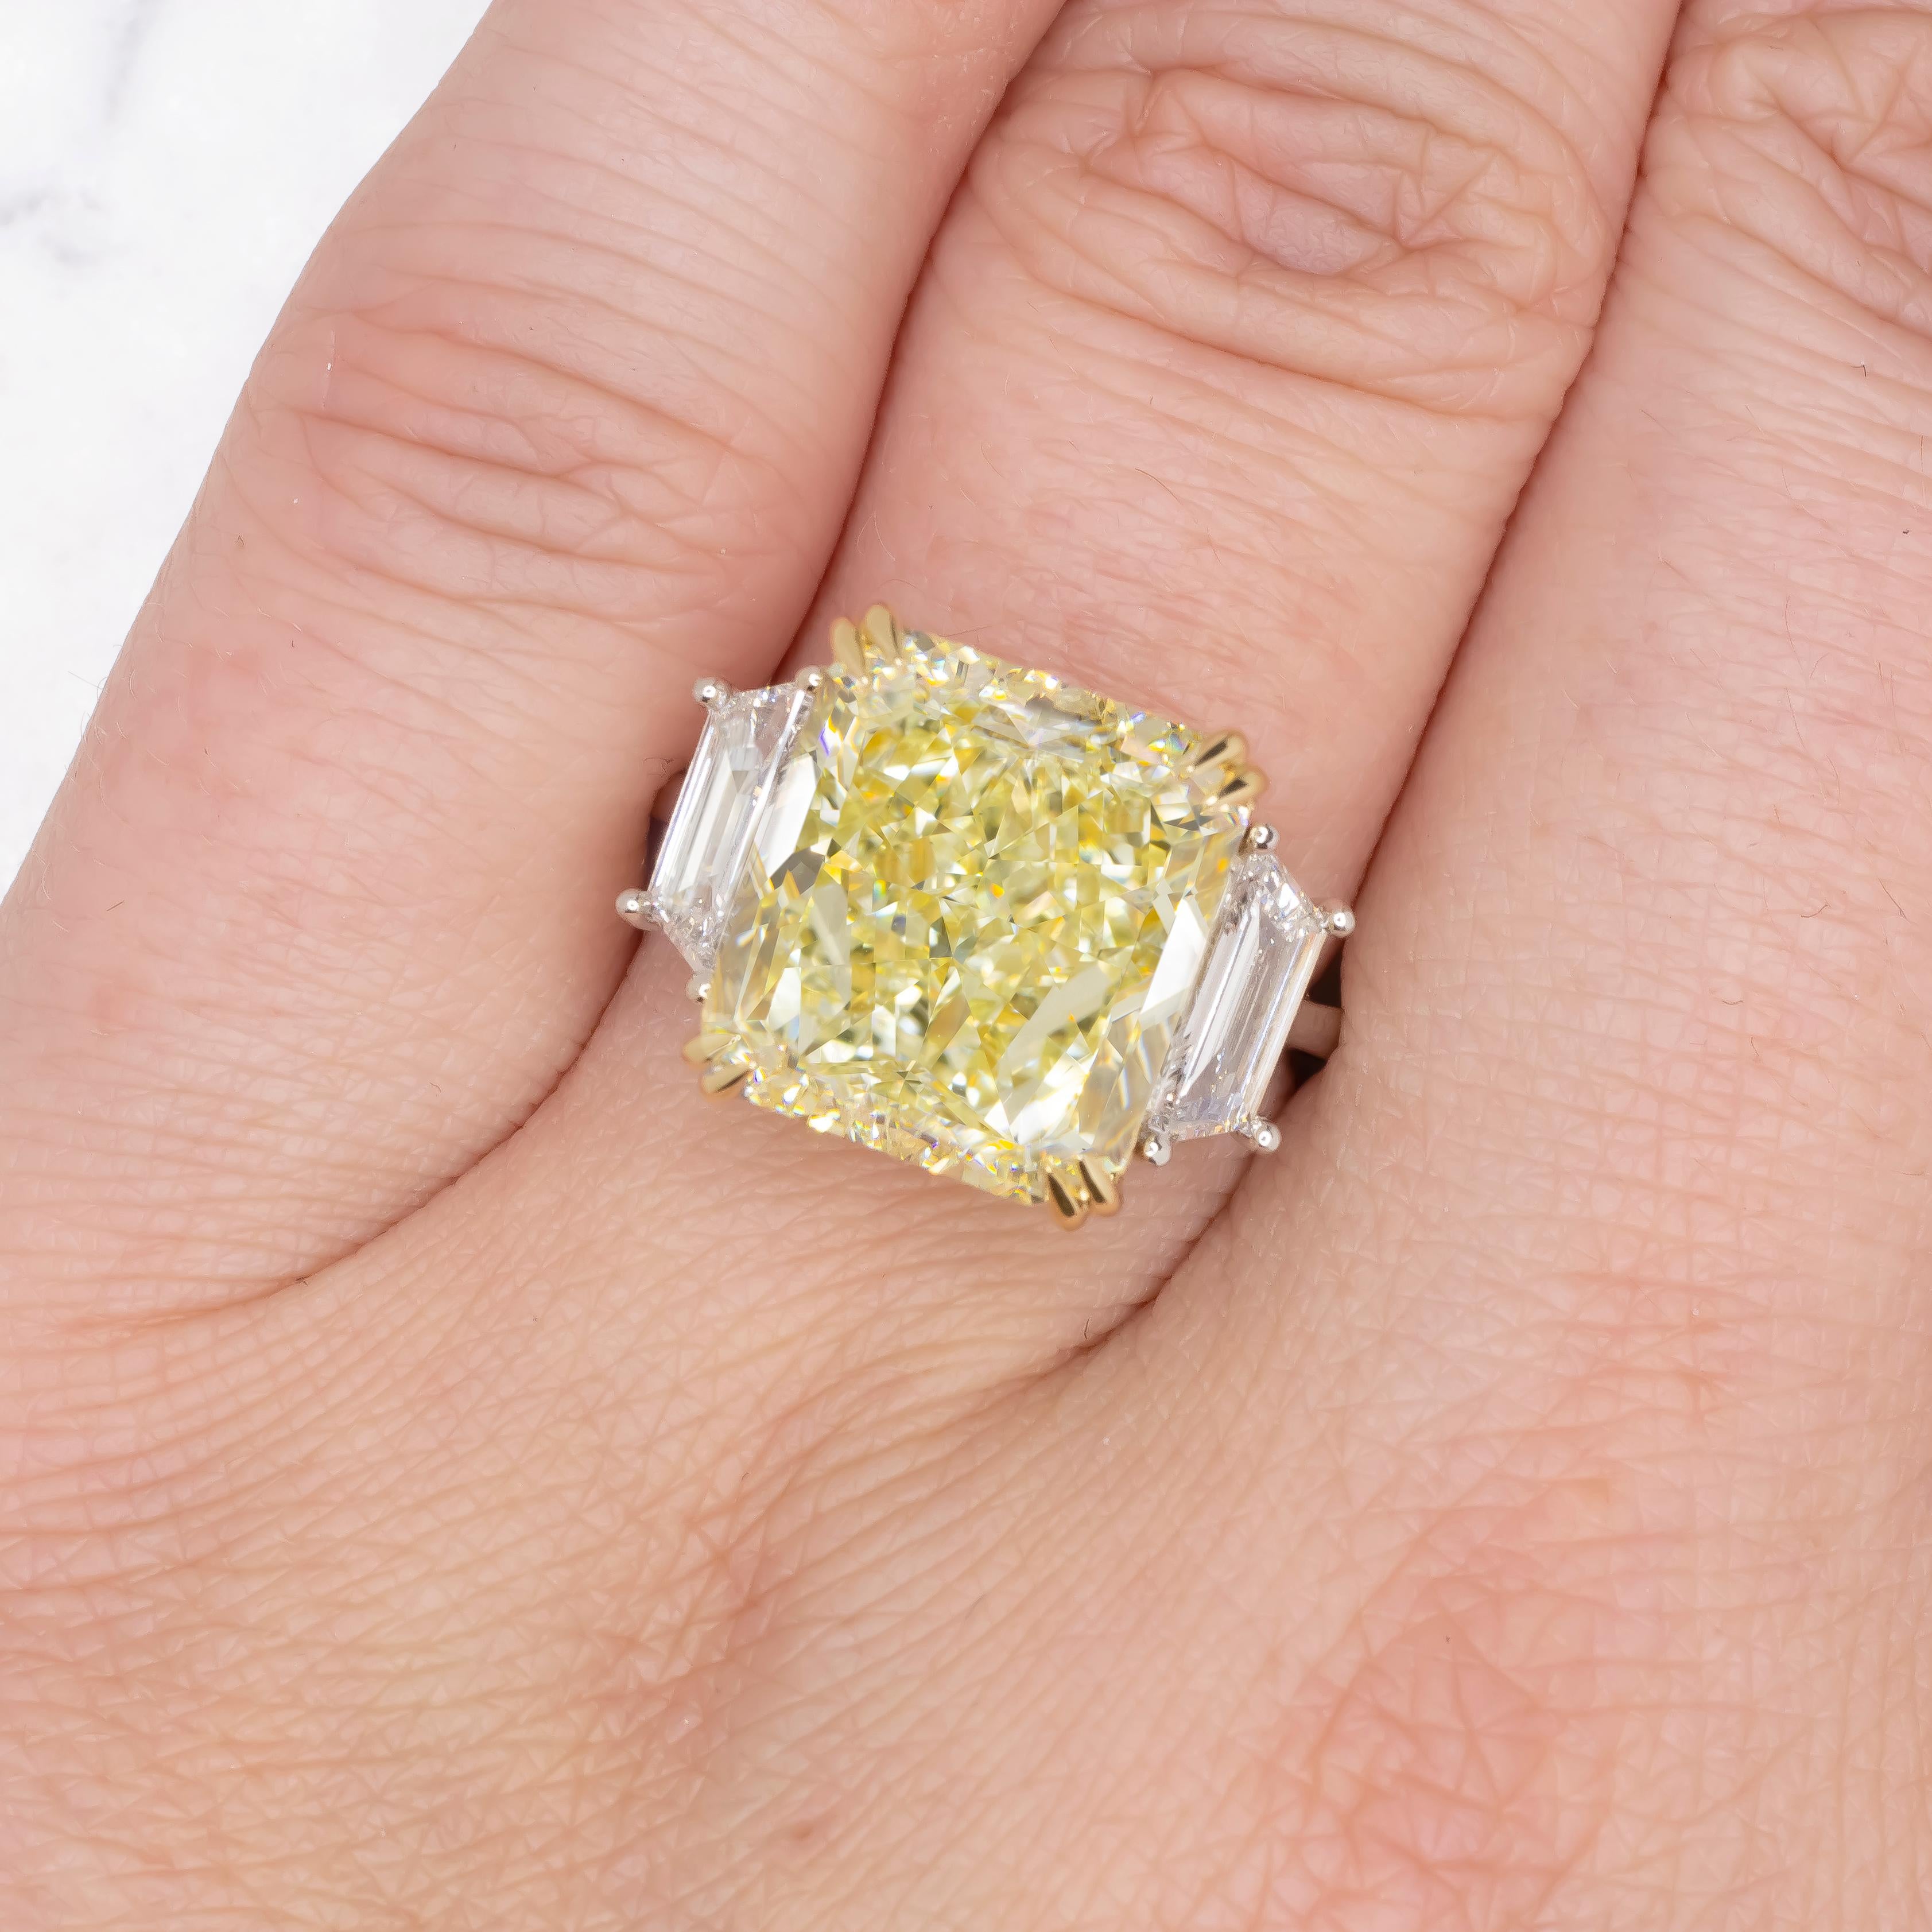 This platinum and 18 carats yellow gold engagement ring showcases a gorgeous 10 carat radiant cut diamond set in a 4 prong 18 karat yellow gold basket. GIA certified the center diamond as Fancy Light Yellow color,  VS2 clarity. Flanking the center